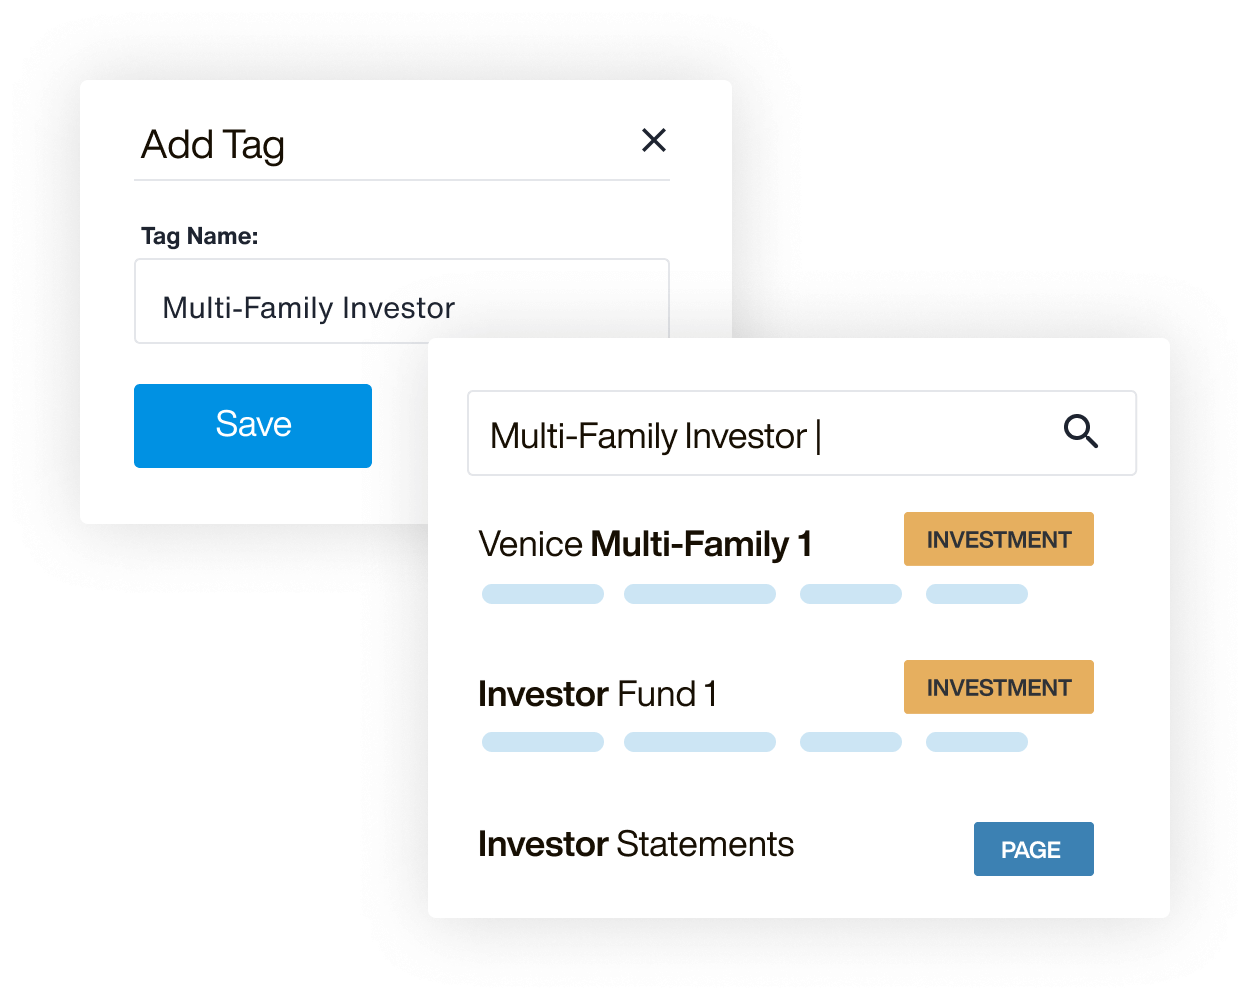 AppFolio Investment Management interface windows of Add Tag and Search for Multi-Family Investor.